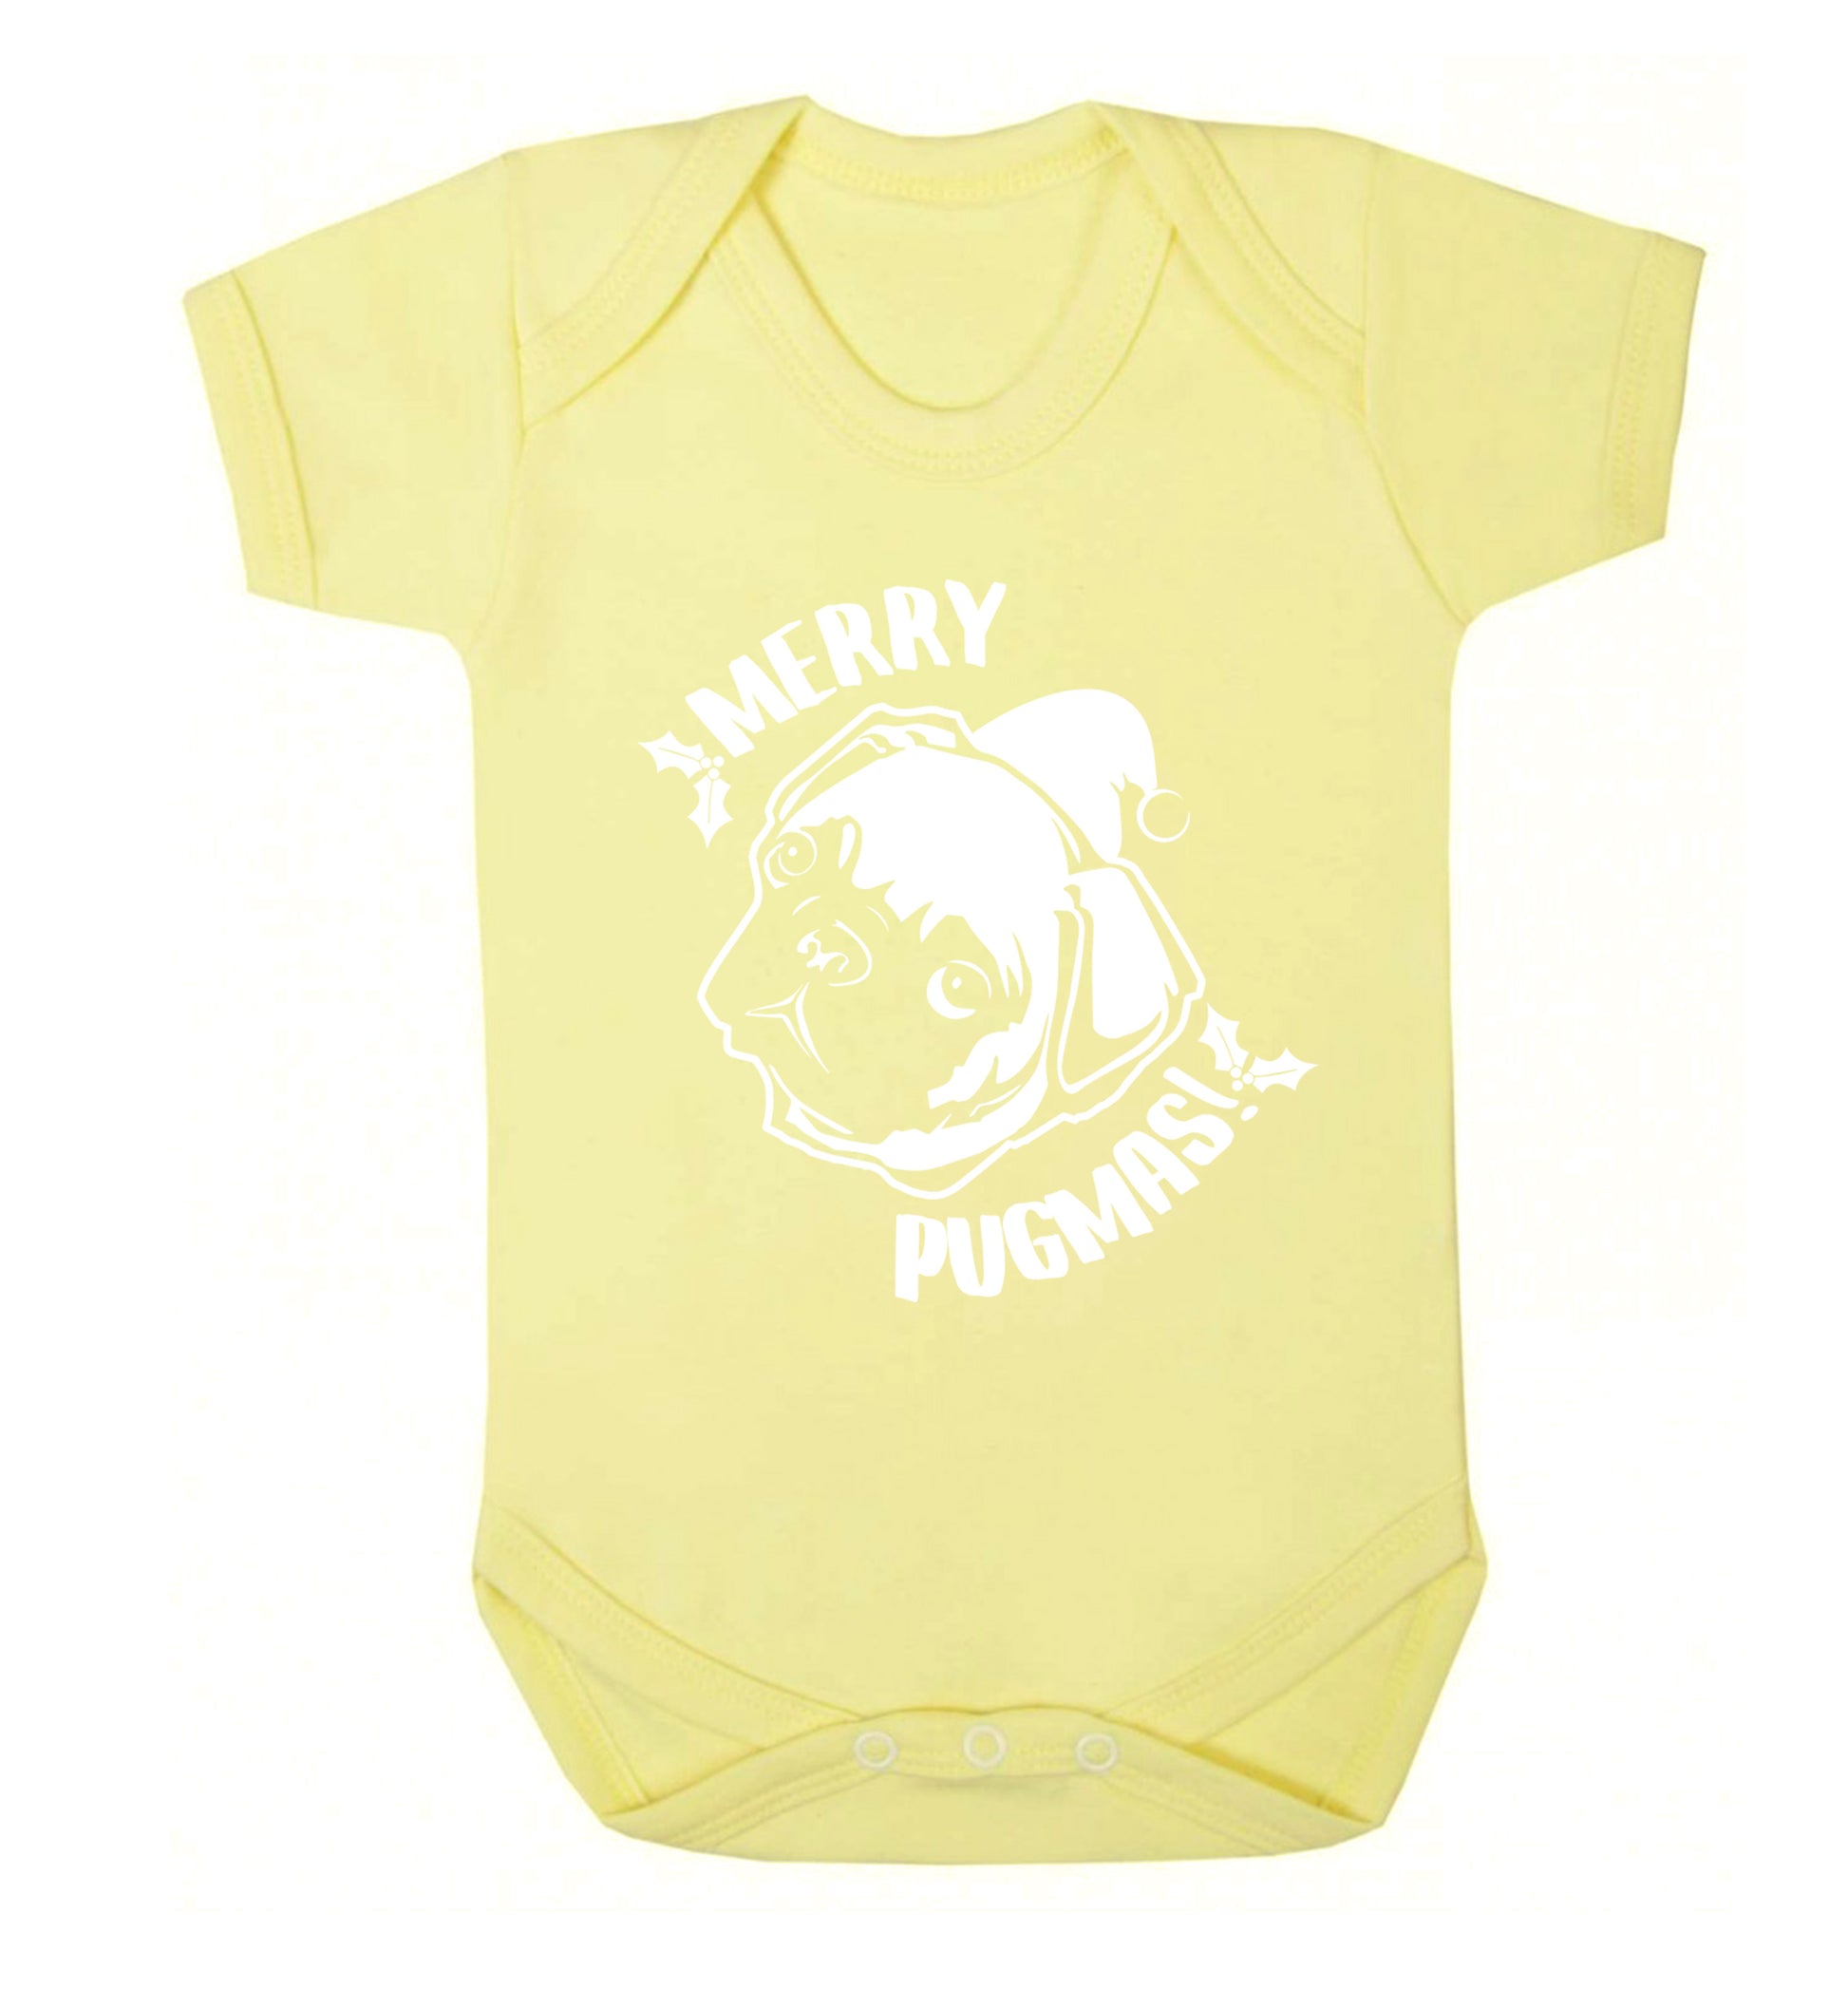 Merry Pugmas Baby Vest pale yellow 18-24 months